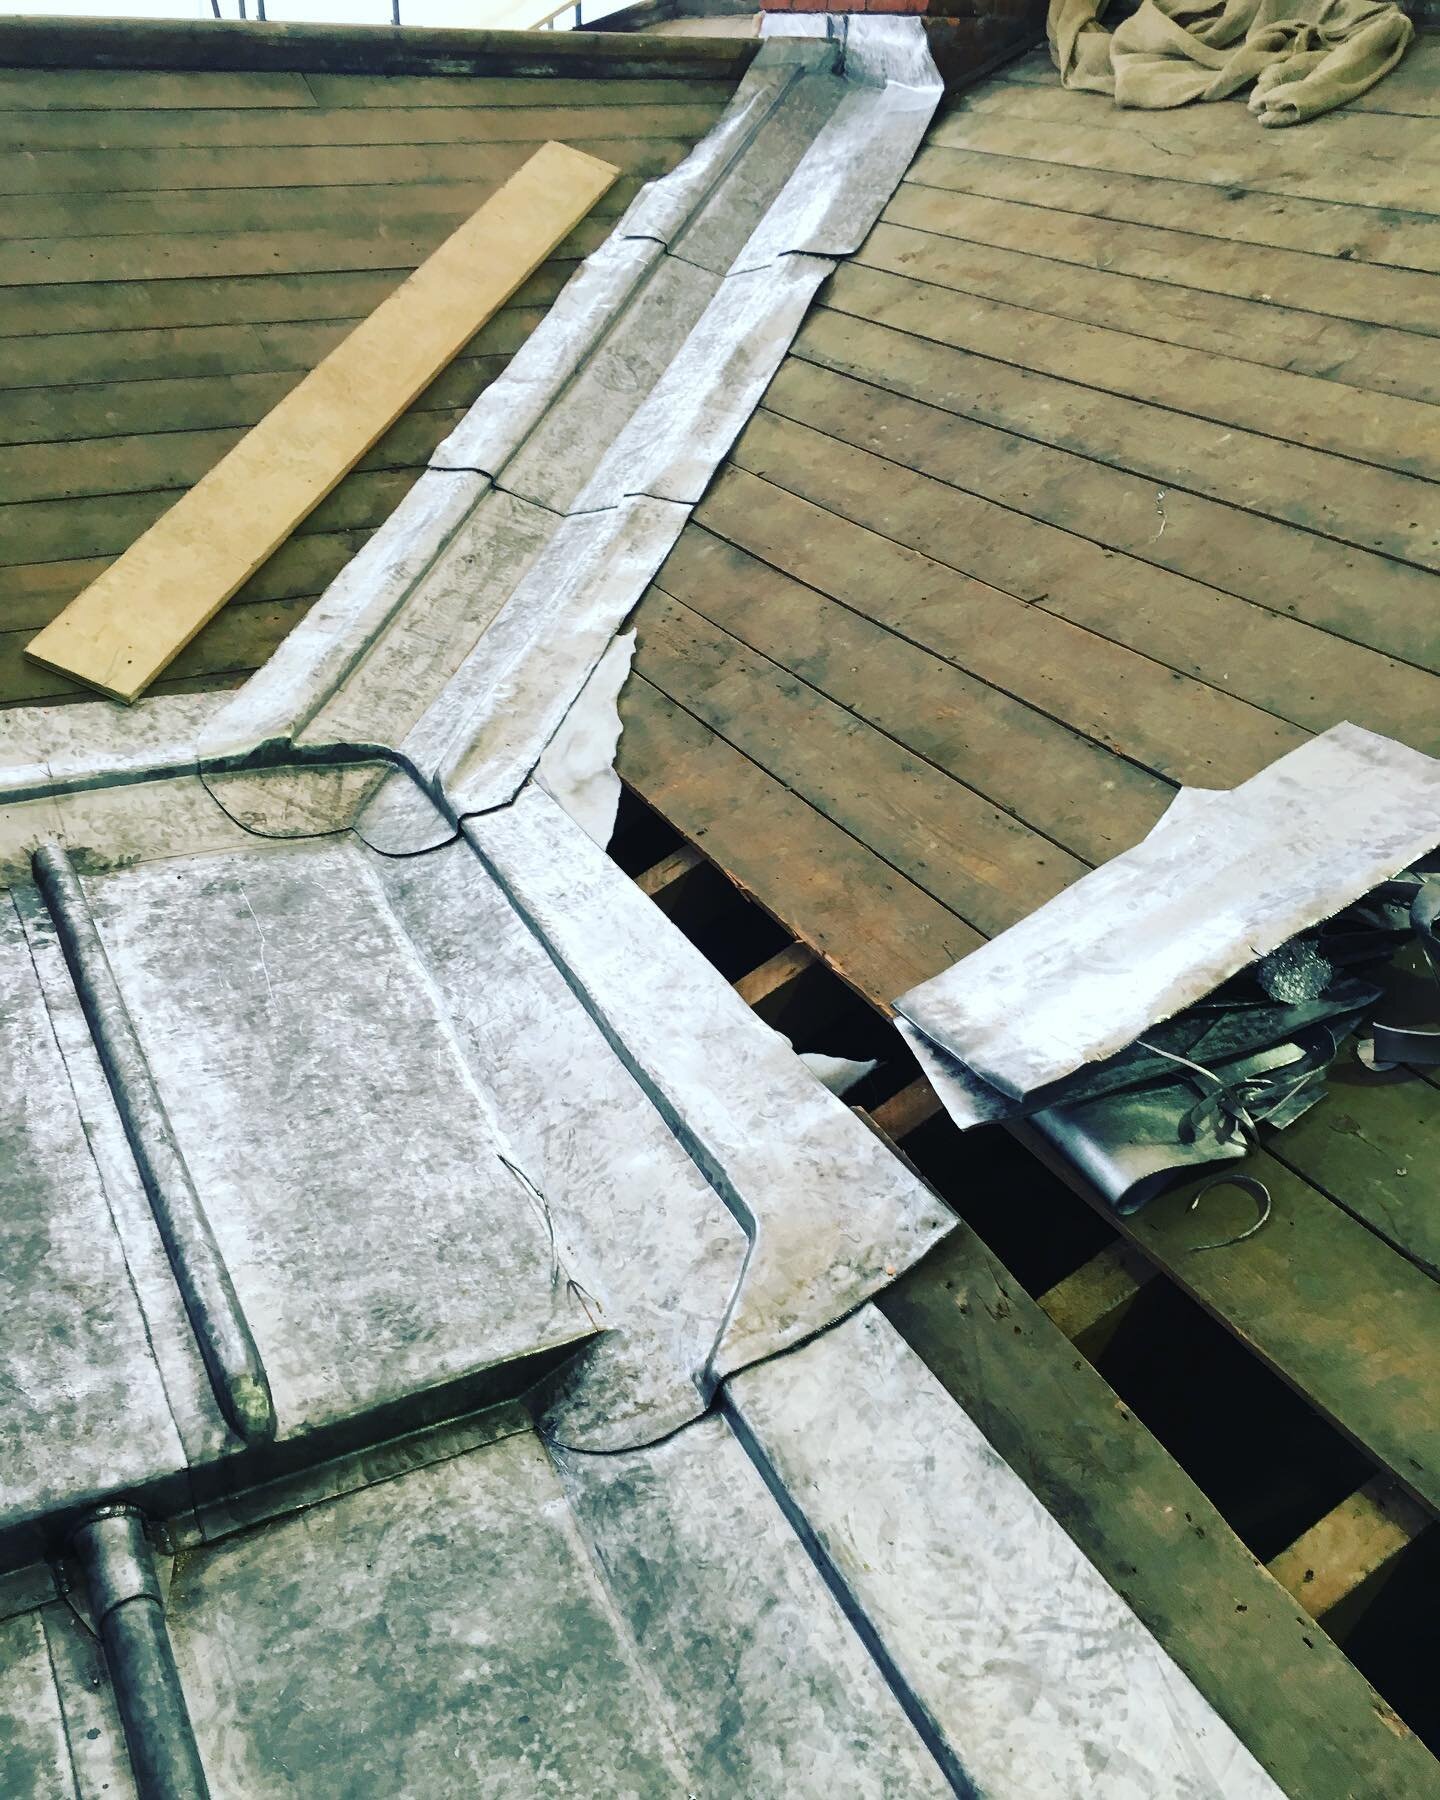 New code 8 sandcast gutters, drilled and screwed flashing, ready for the roof to be slated. 📞07983131947
#leadroofing #leadroofs #leadworker  #leadworkspecialists #heritagebuilding  #leadroofingspecialists #leadbossing #leadroofer #heritage # #leadw